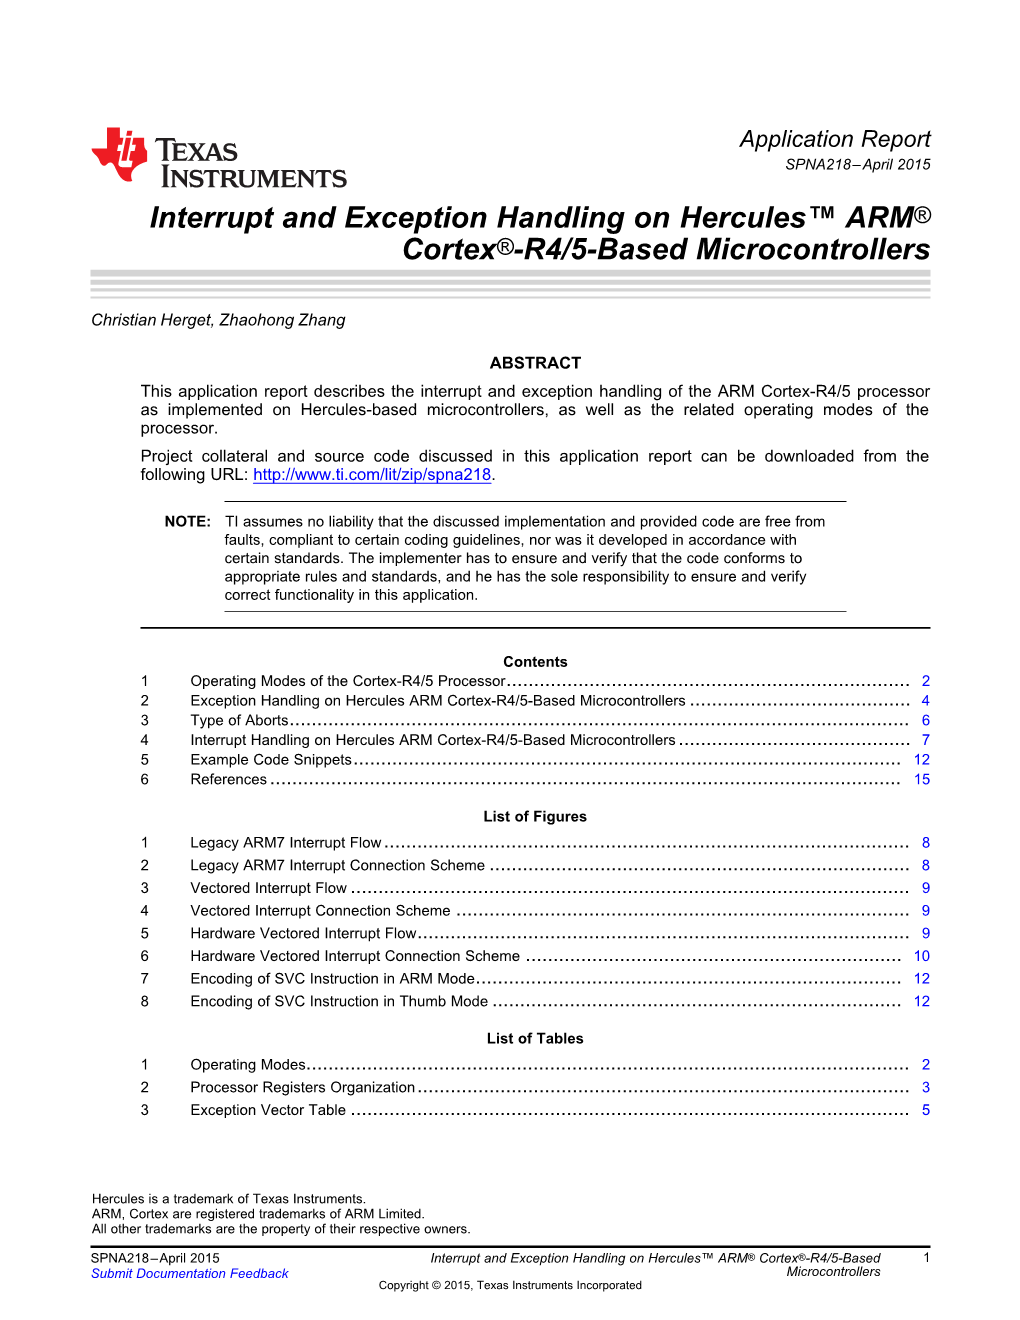 Interrupt and Exception Handling on Hercules ARM Cortex-R4/5-Based